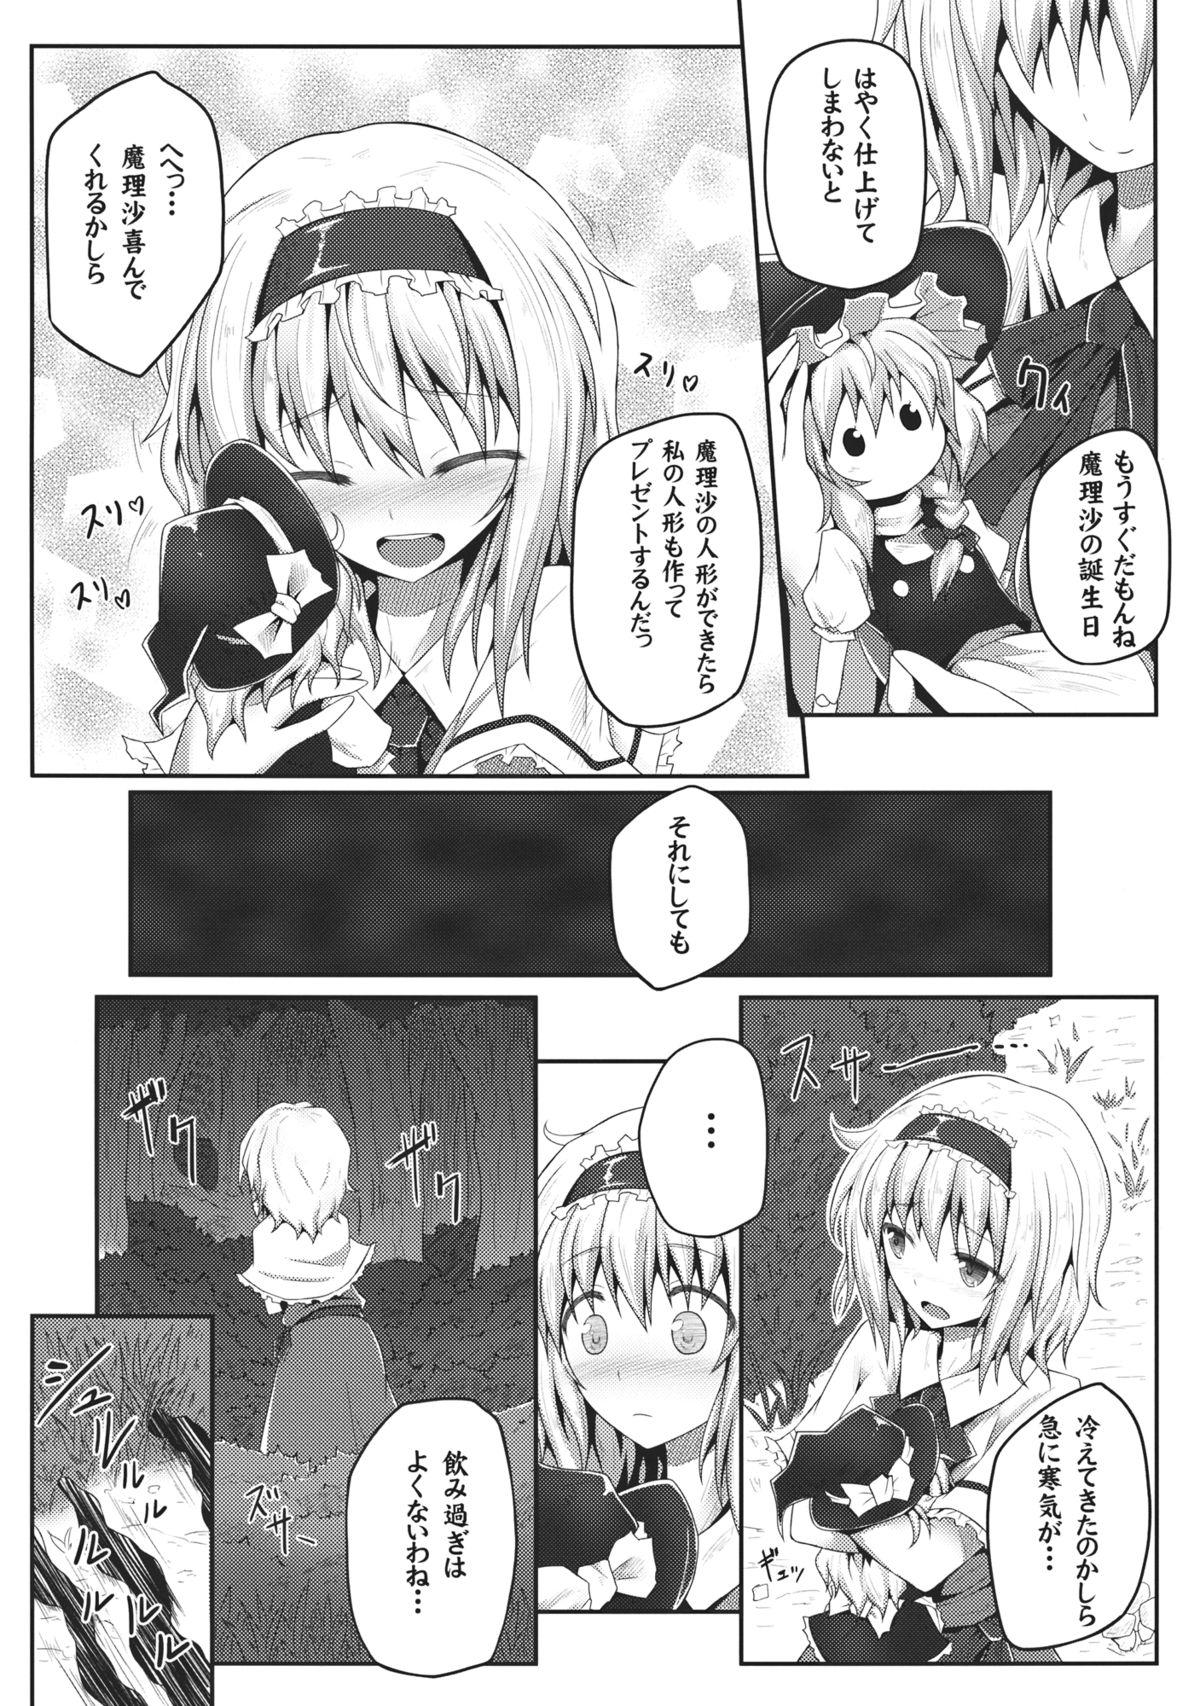 Oldvsyoung Nozomiusu - Touhou project Plump - Page 5